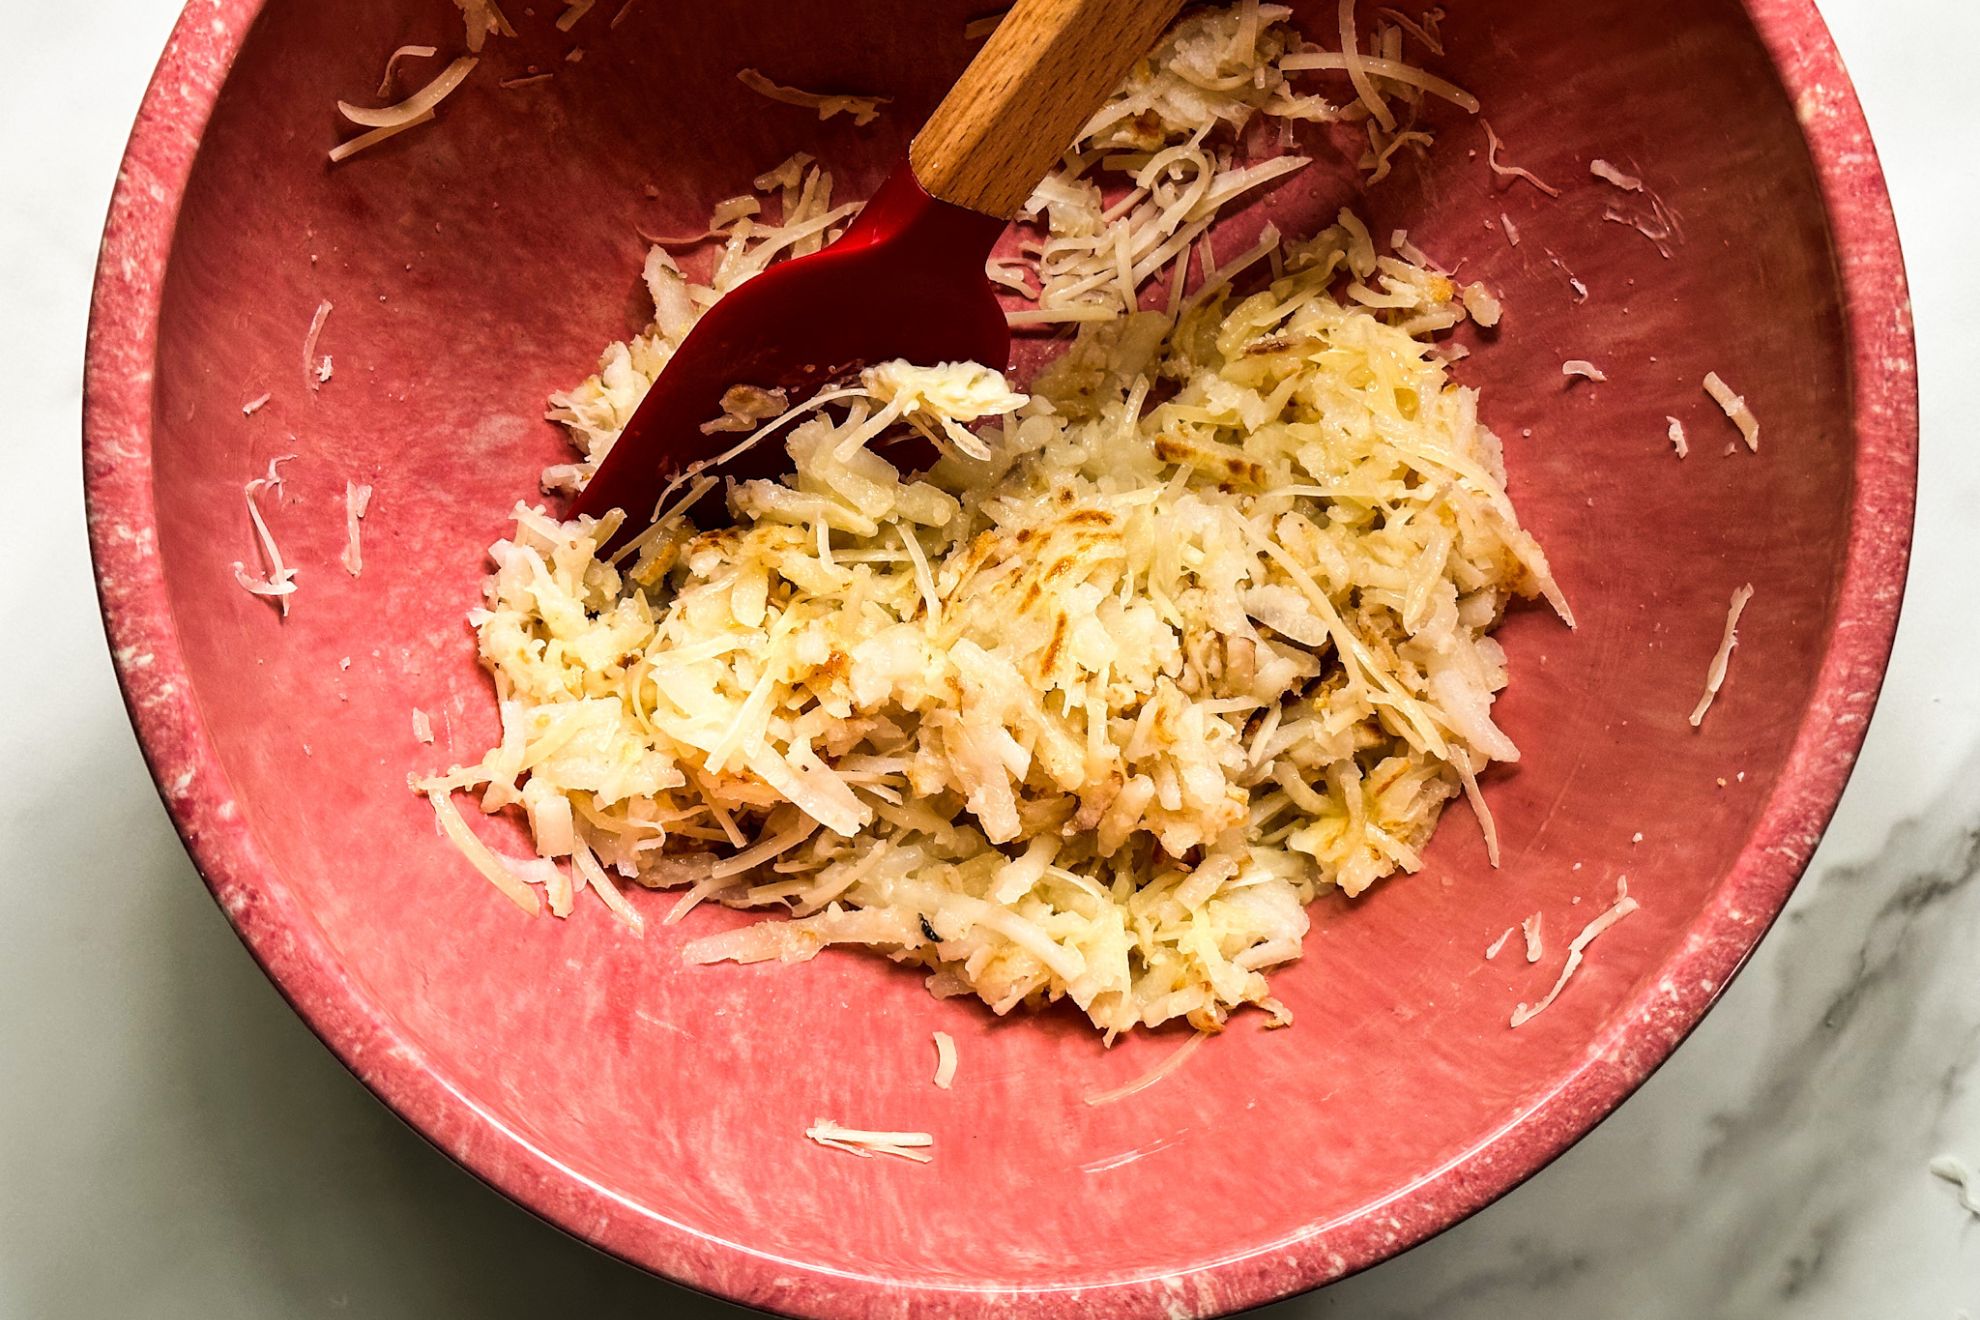 This is an overhead horizontal image of a pink bowl on a white marble surface. In the bowl is a shredded potato mixture with a red rubber spatula with a wooden handle in the bowl and leaning to the top middle of the image.